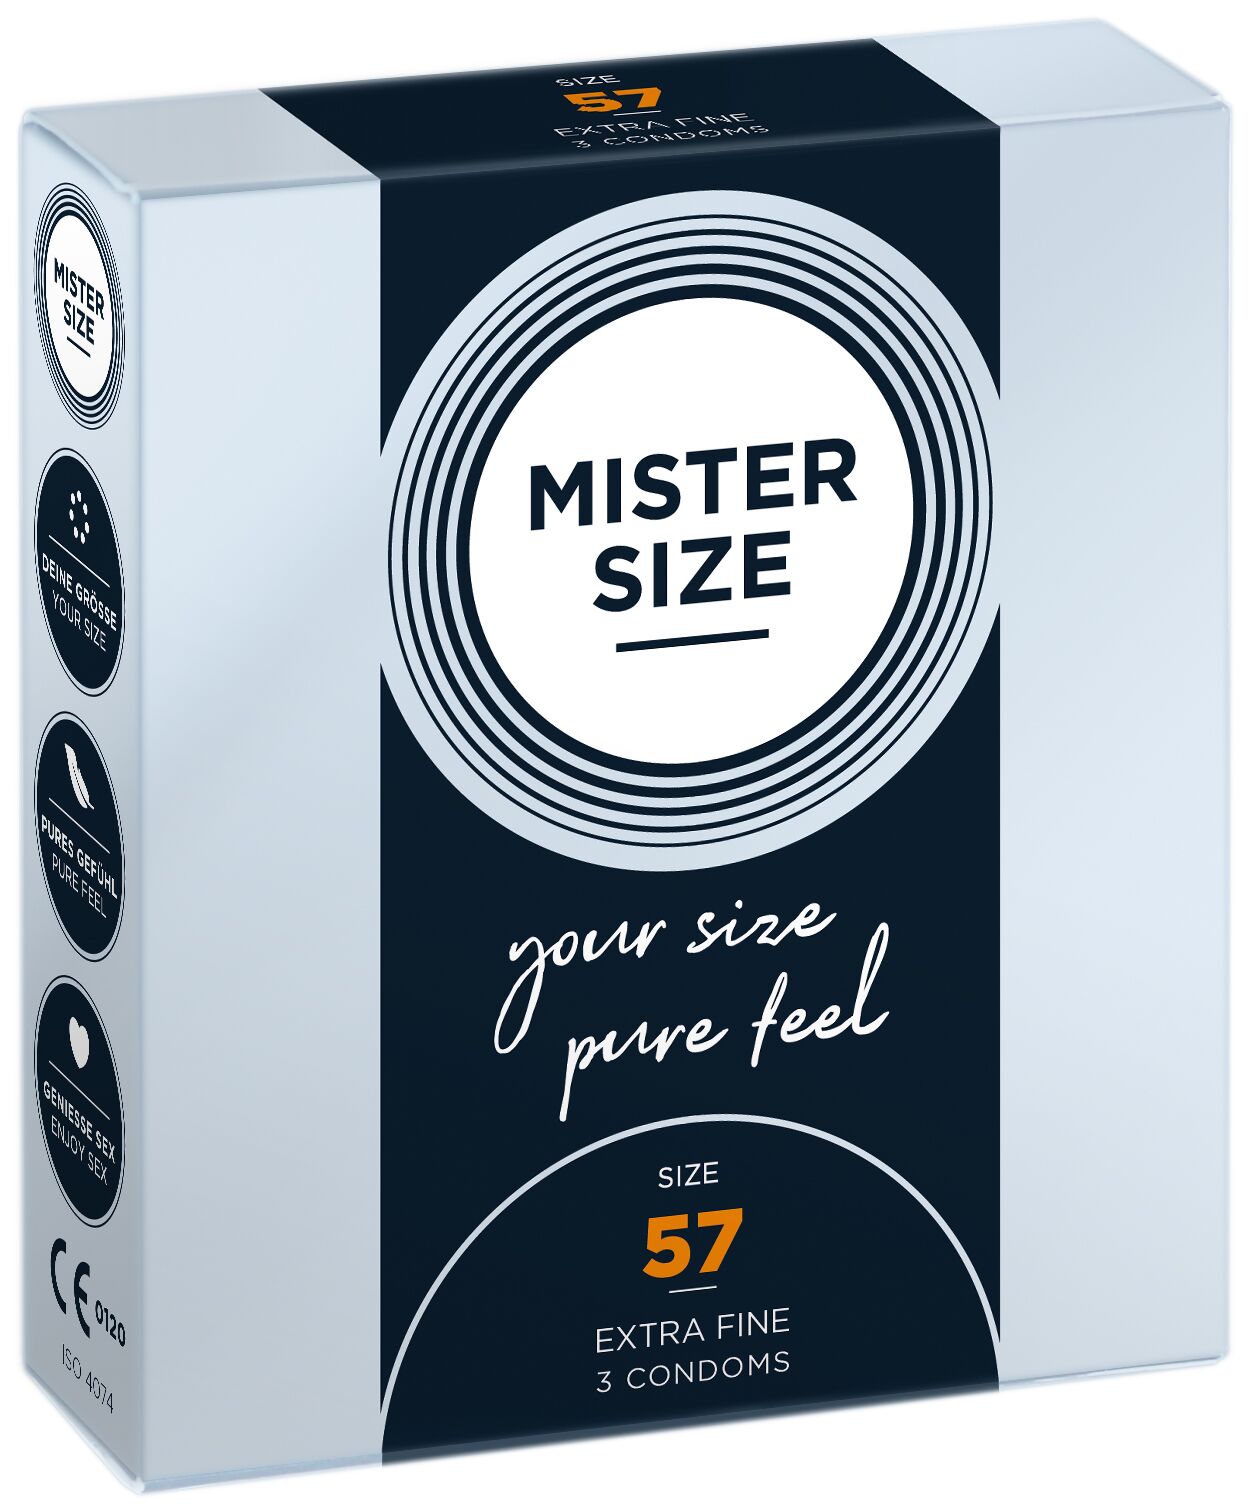  Mister Size — pure feel 